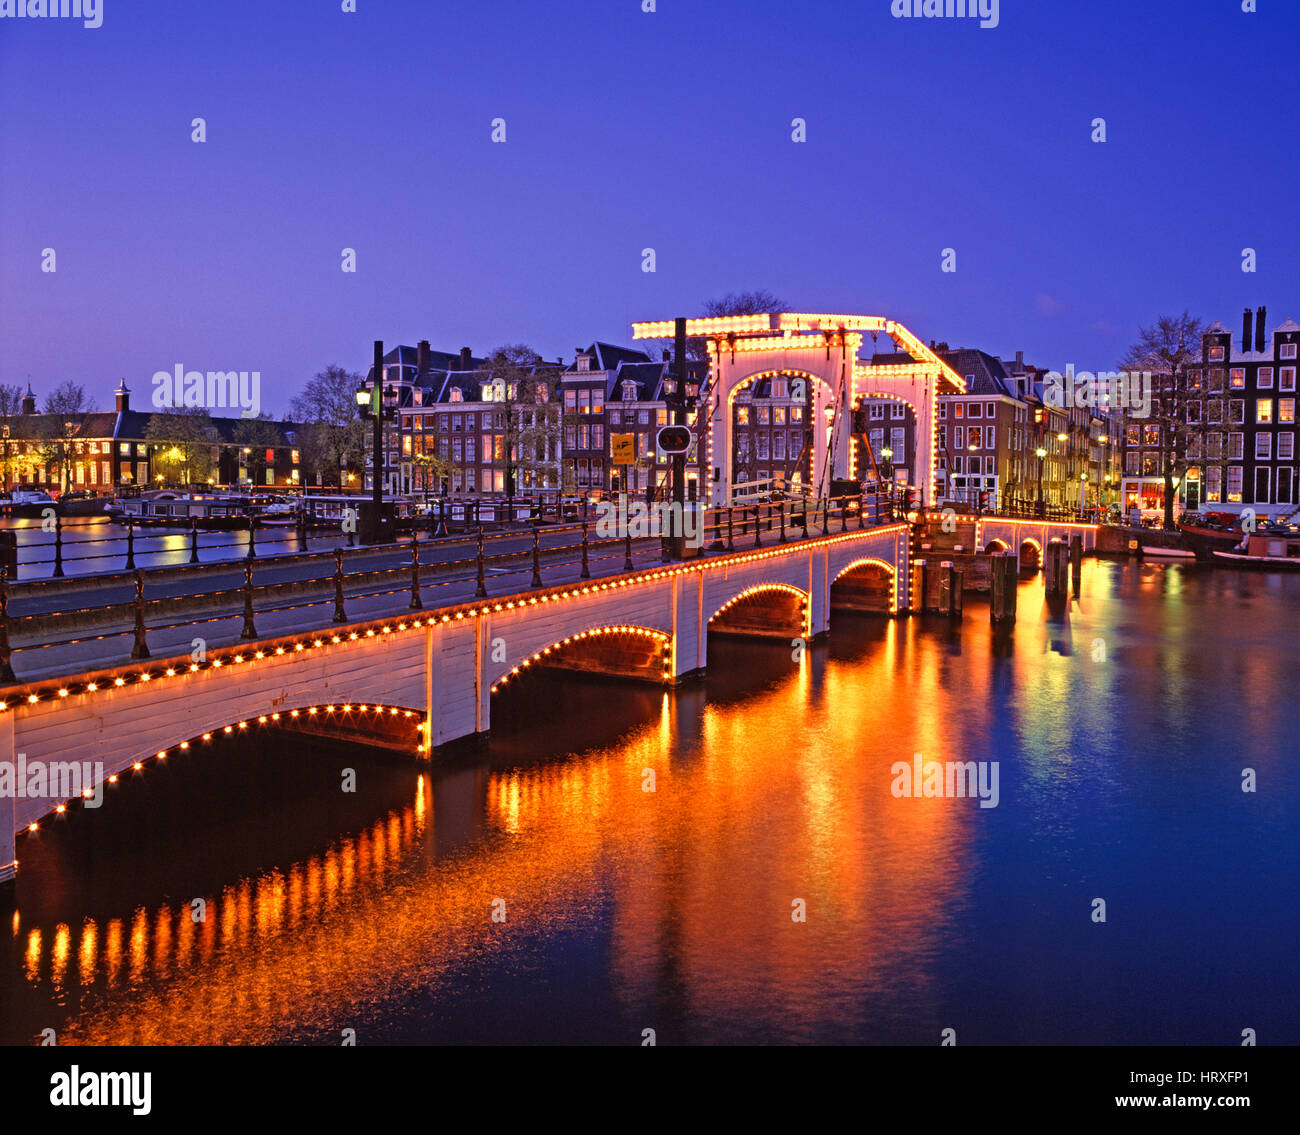 Skinny Bridge (Magere Brug) reflecting in the River Amstel at night, Amsterdam, Holland, Netherlands Stock Photo